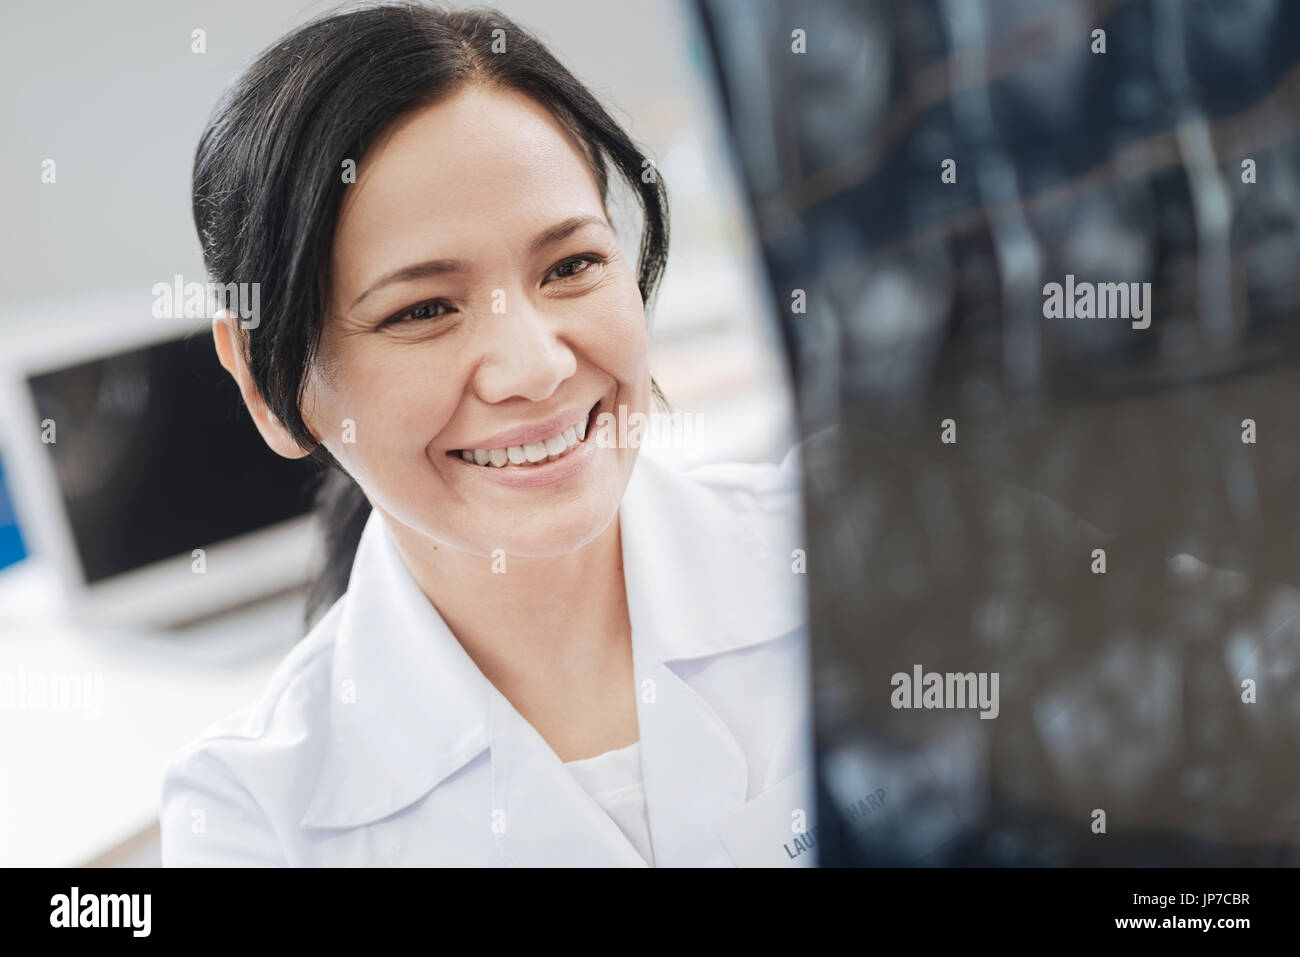 Happy emotional woman smiling Stock Photo